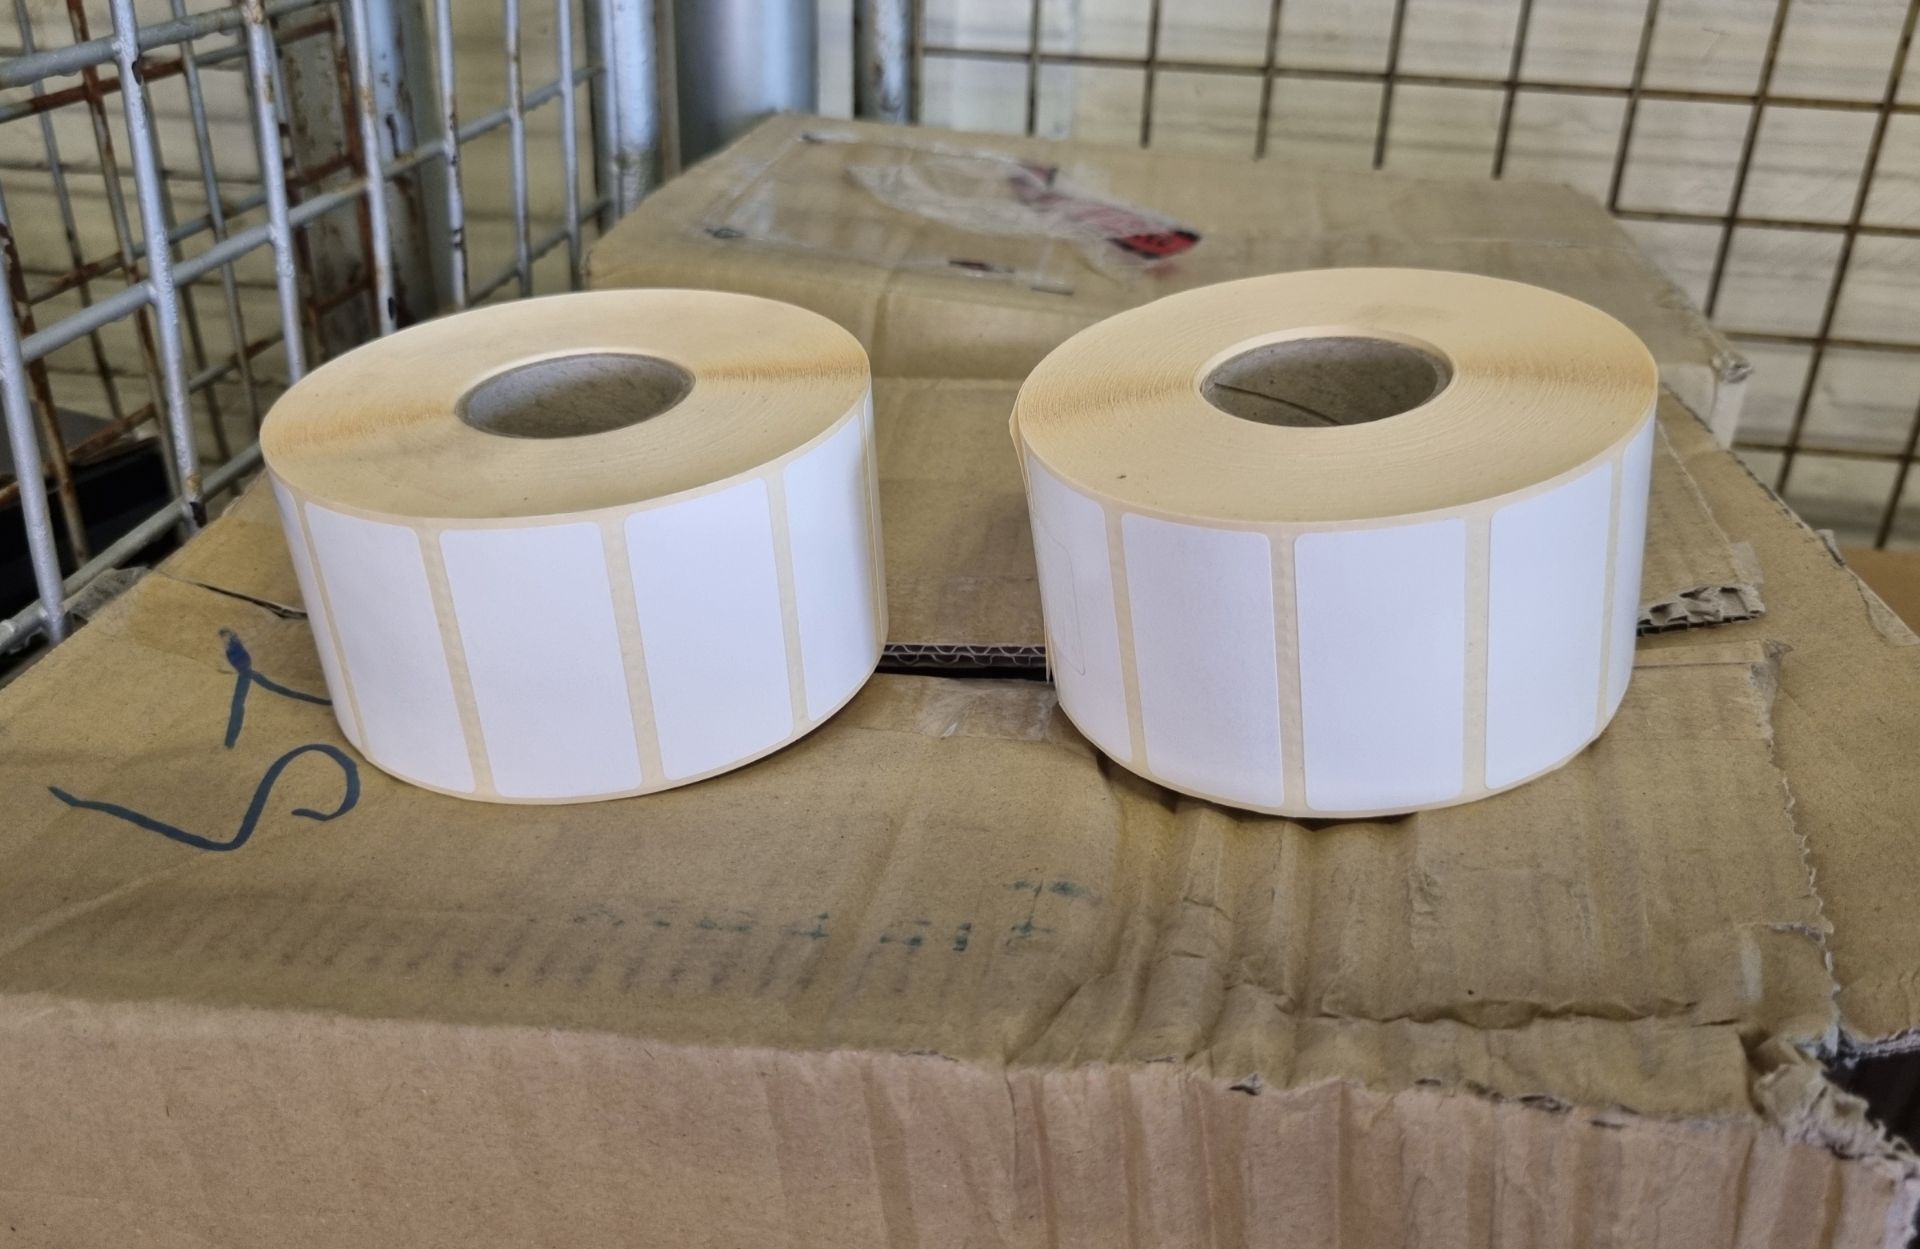 Swing bin liners, rolls of white sticky labels - Image 5 of 10